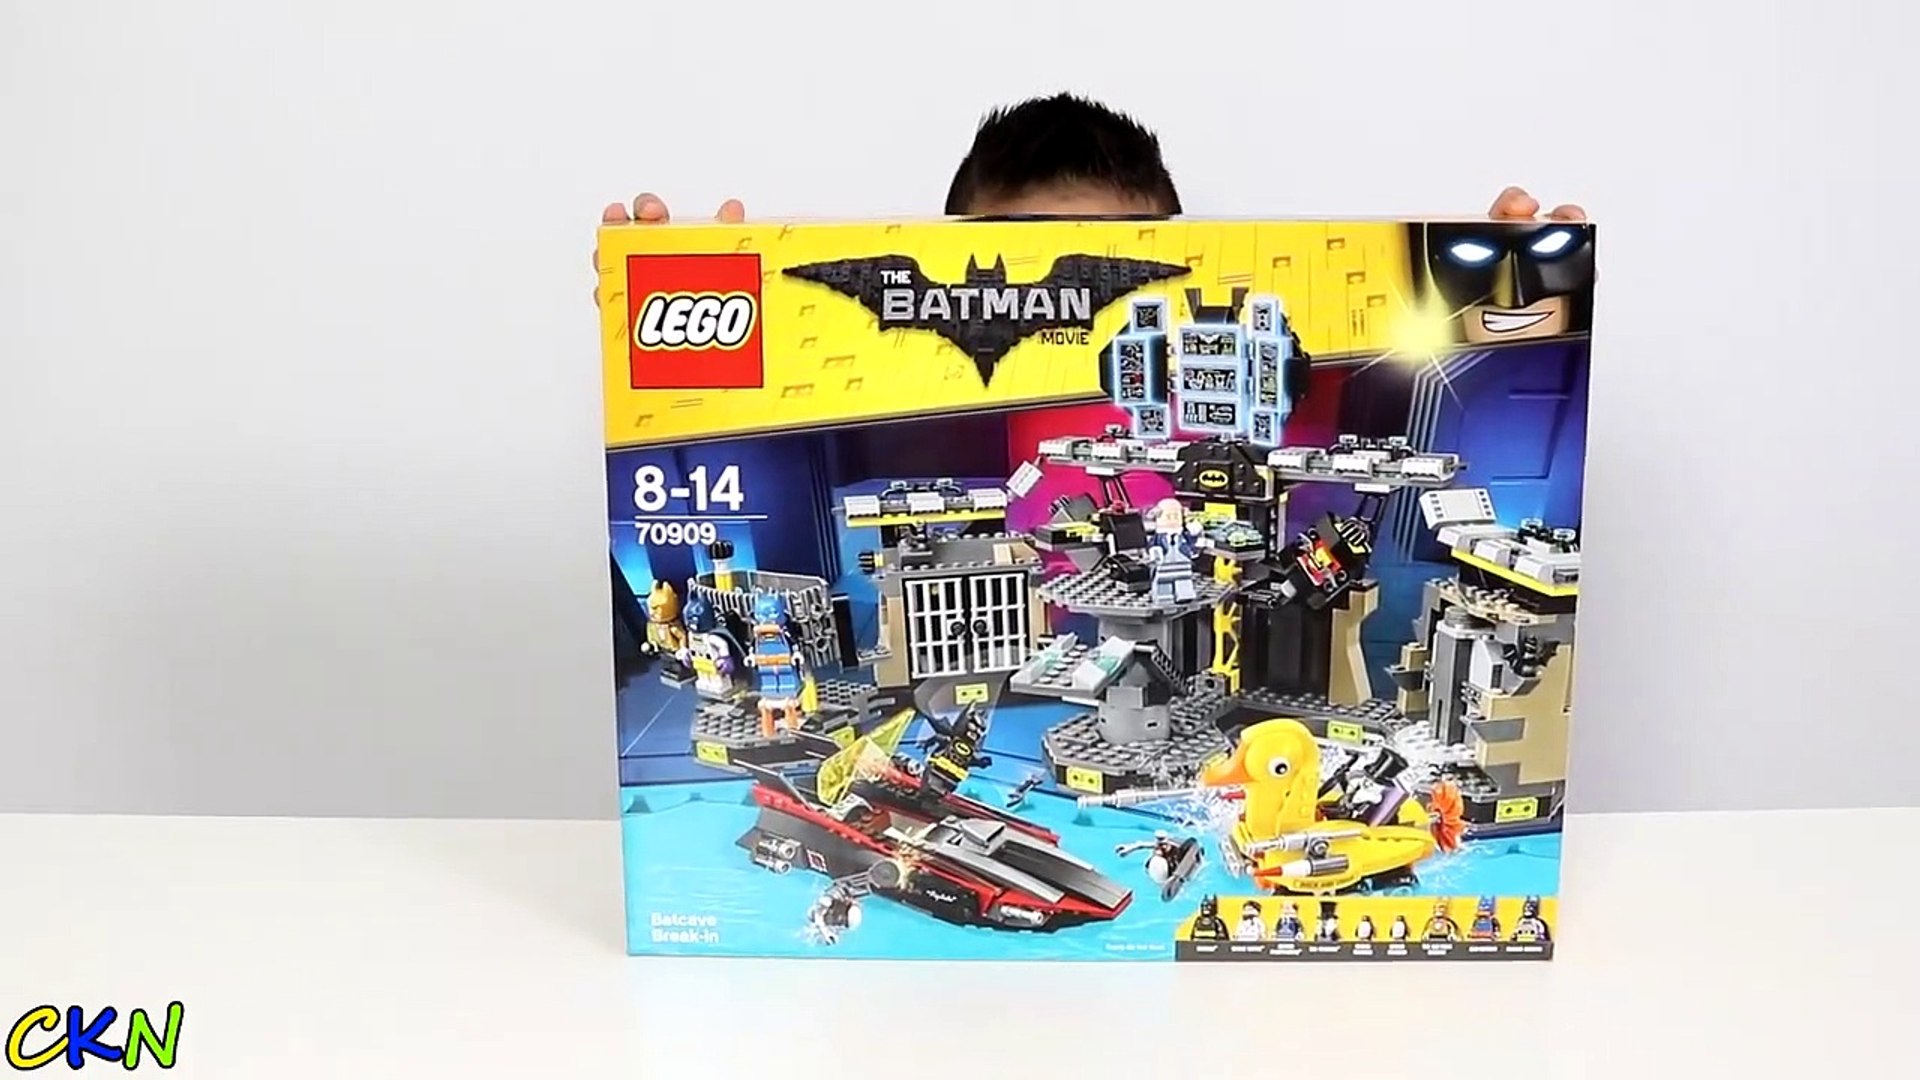 The Batman Lego Movie Batcave Break-In Set Unboxing Assembling And Playing  With Ckn Toys - video Dailymotion